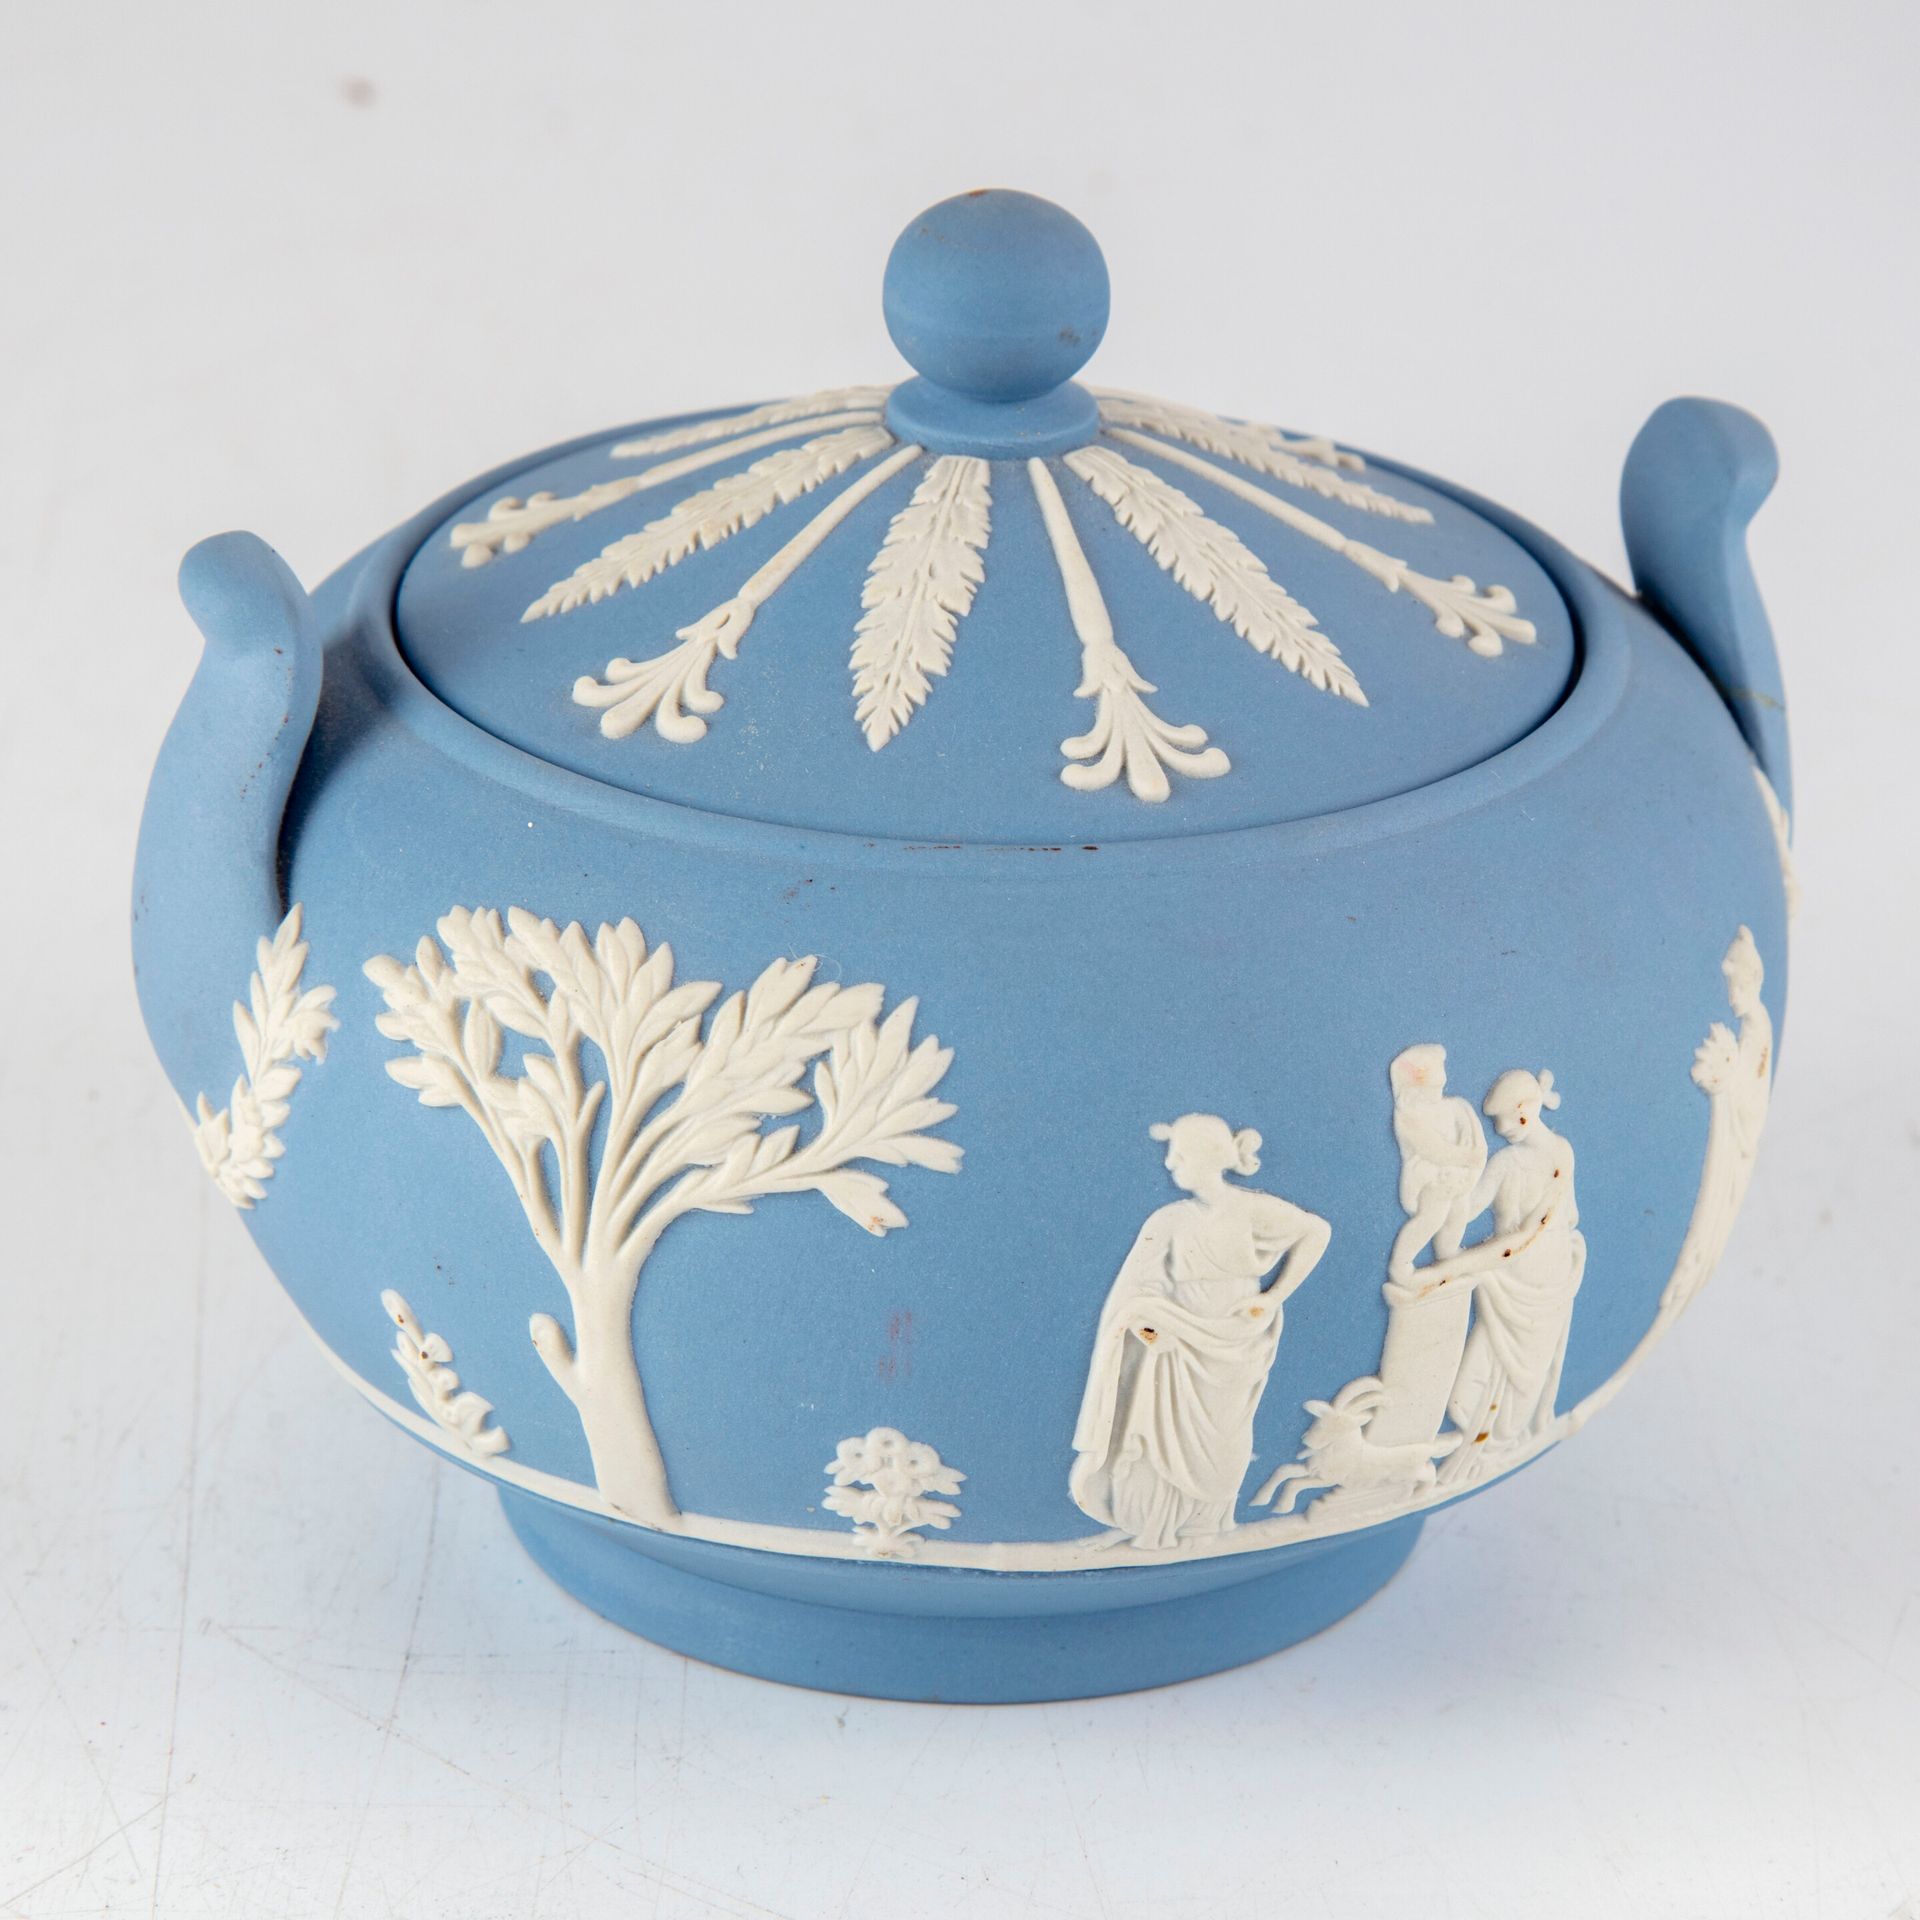 Null WEDGWOOD 

Small covered porcelain pot with white decoration on blue backgr&hellip;